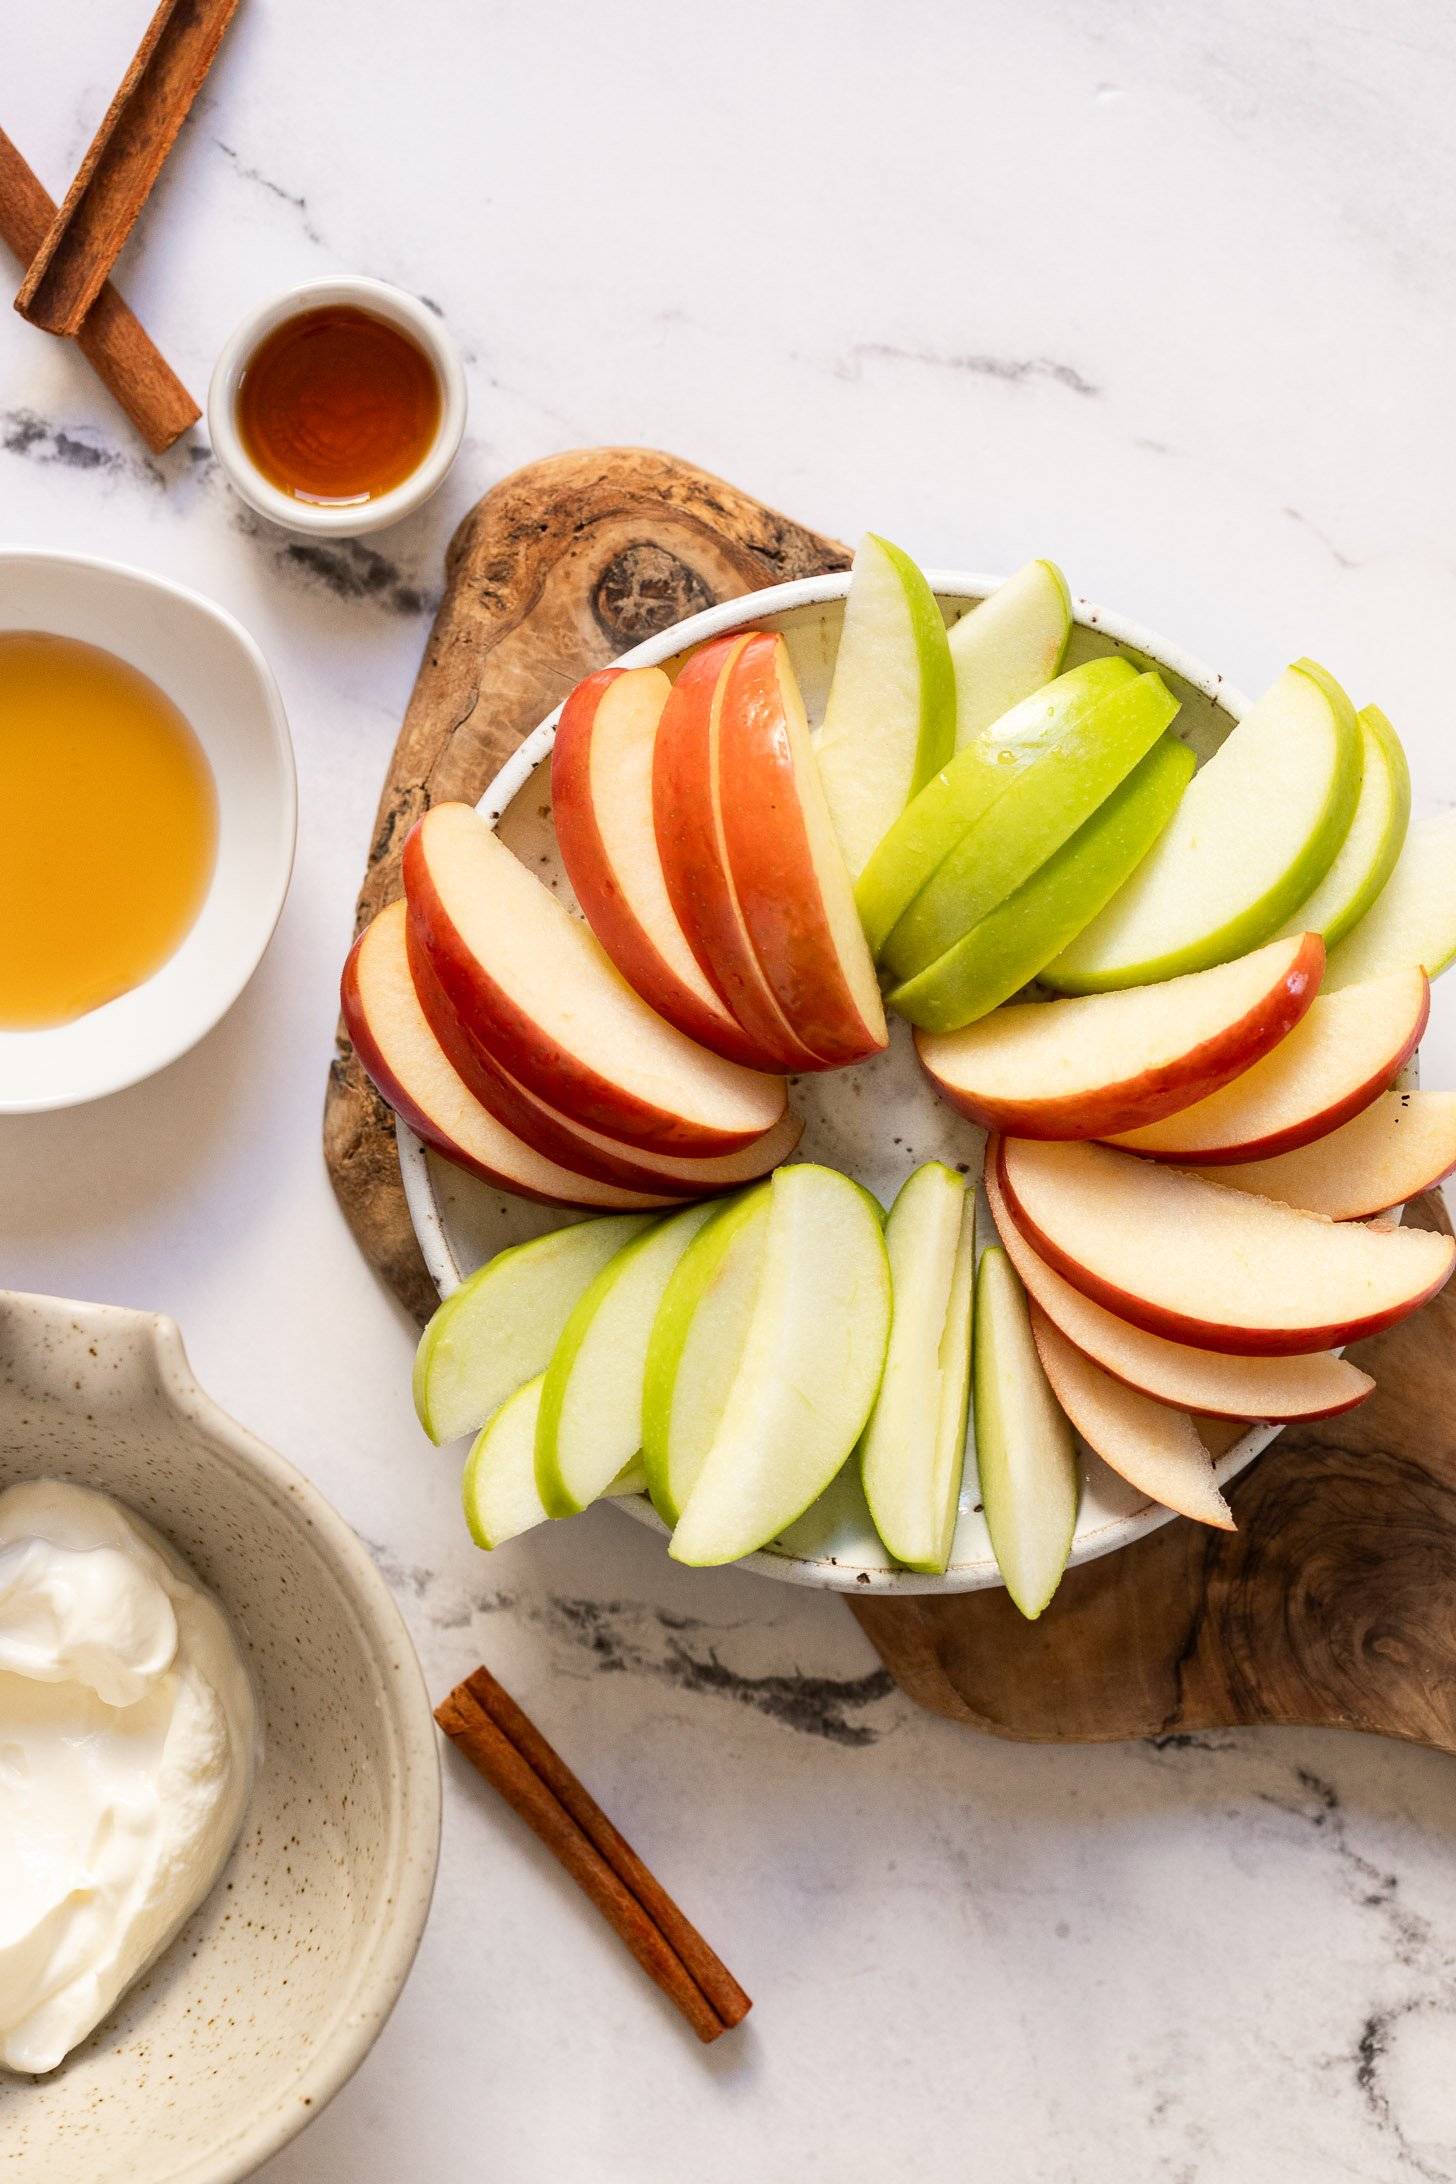 Apple slices on plate next to bowls of ingredients.